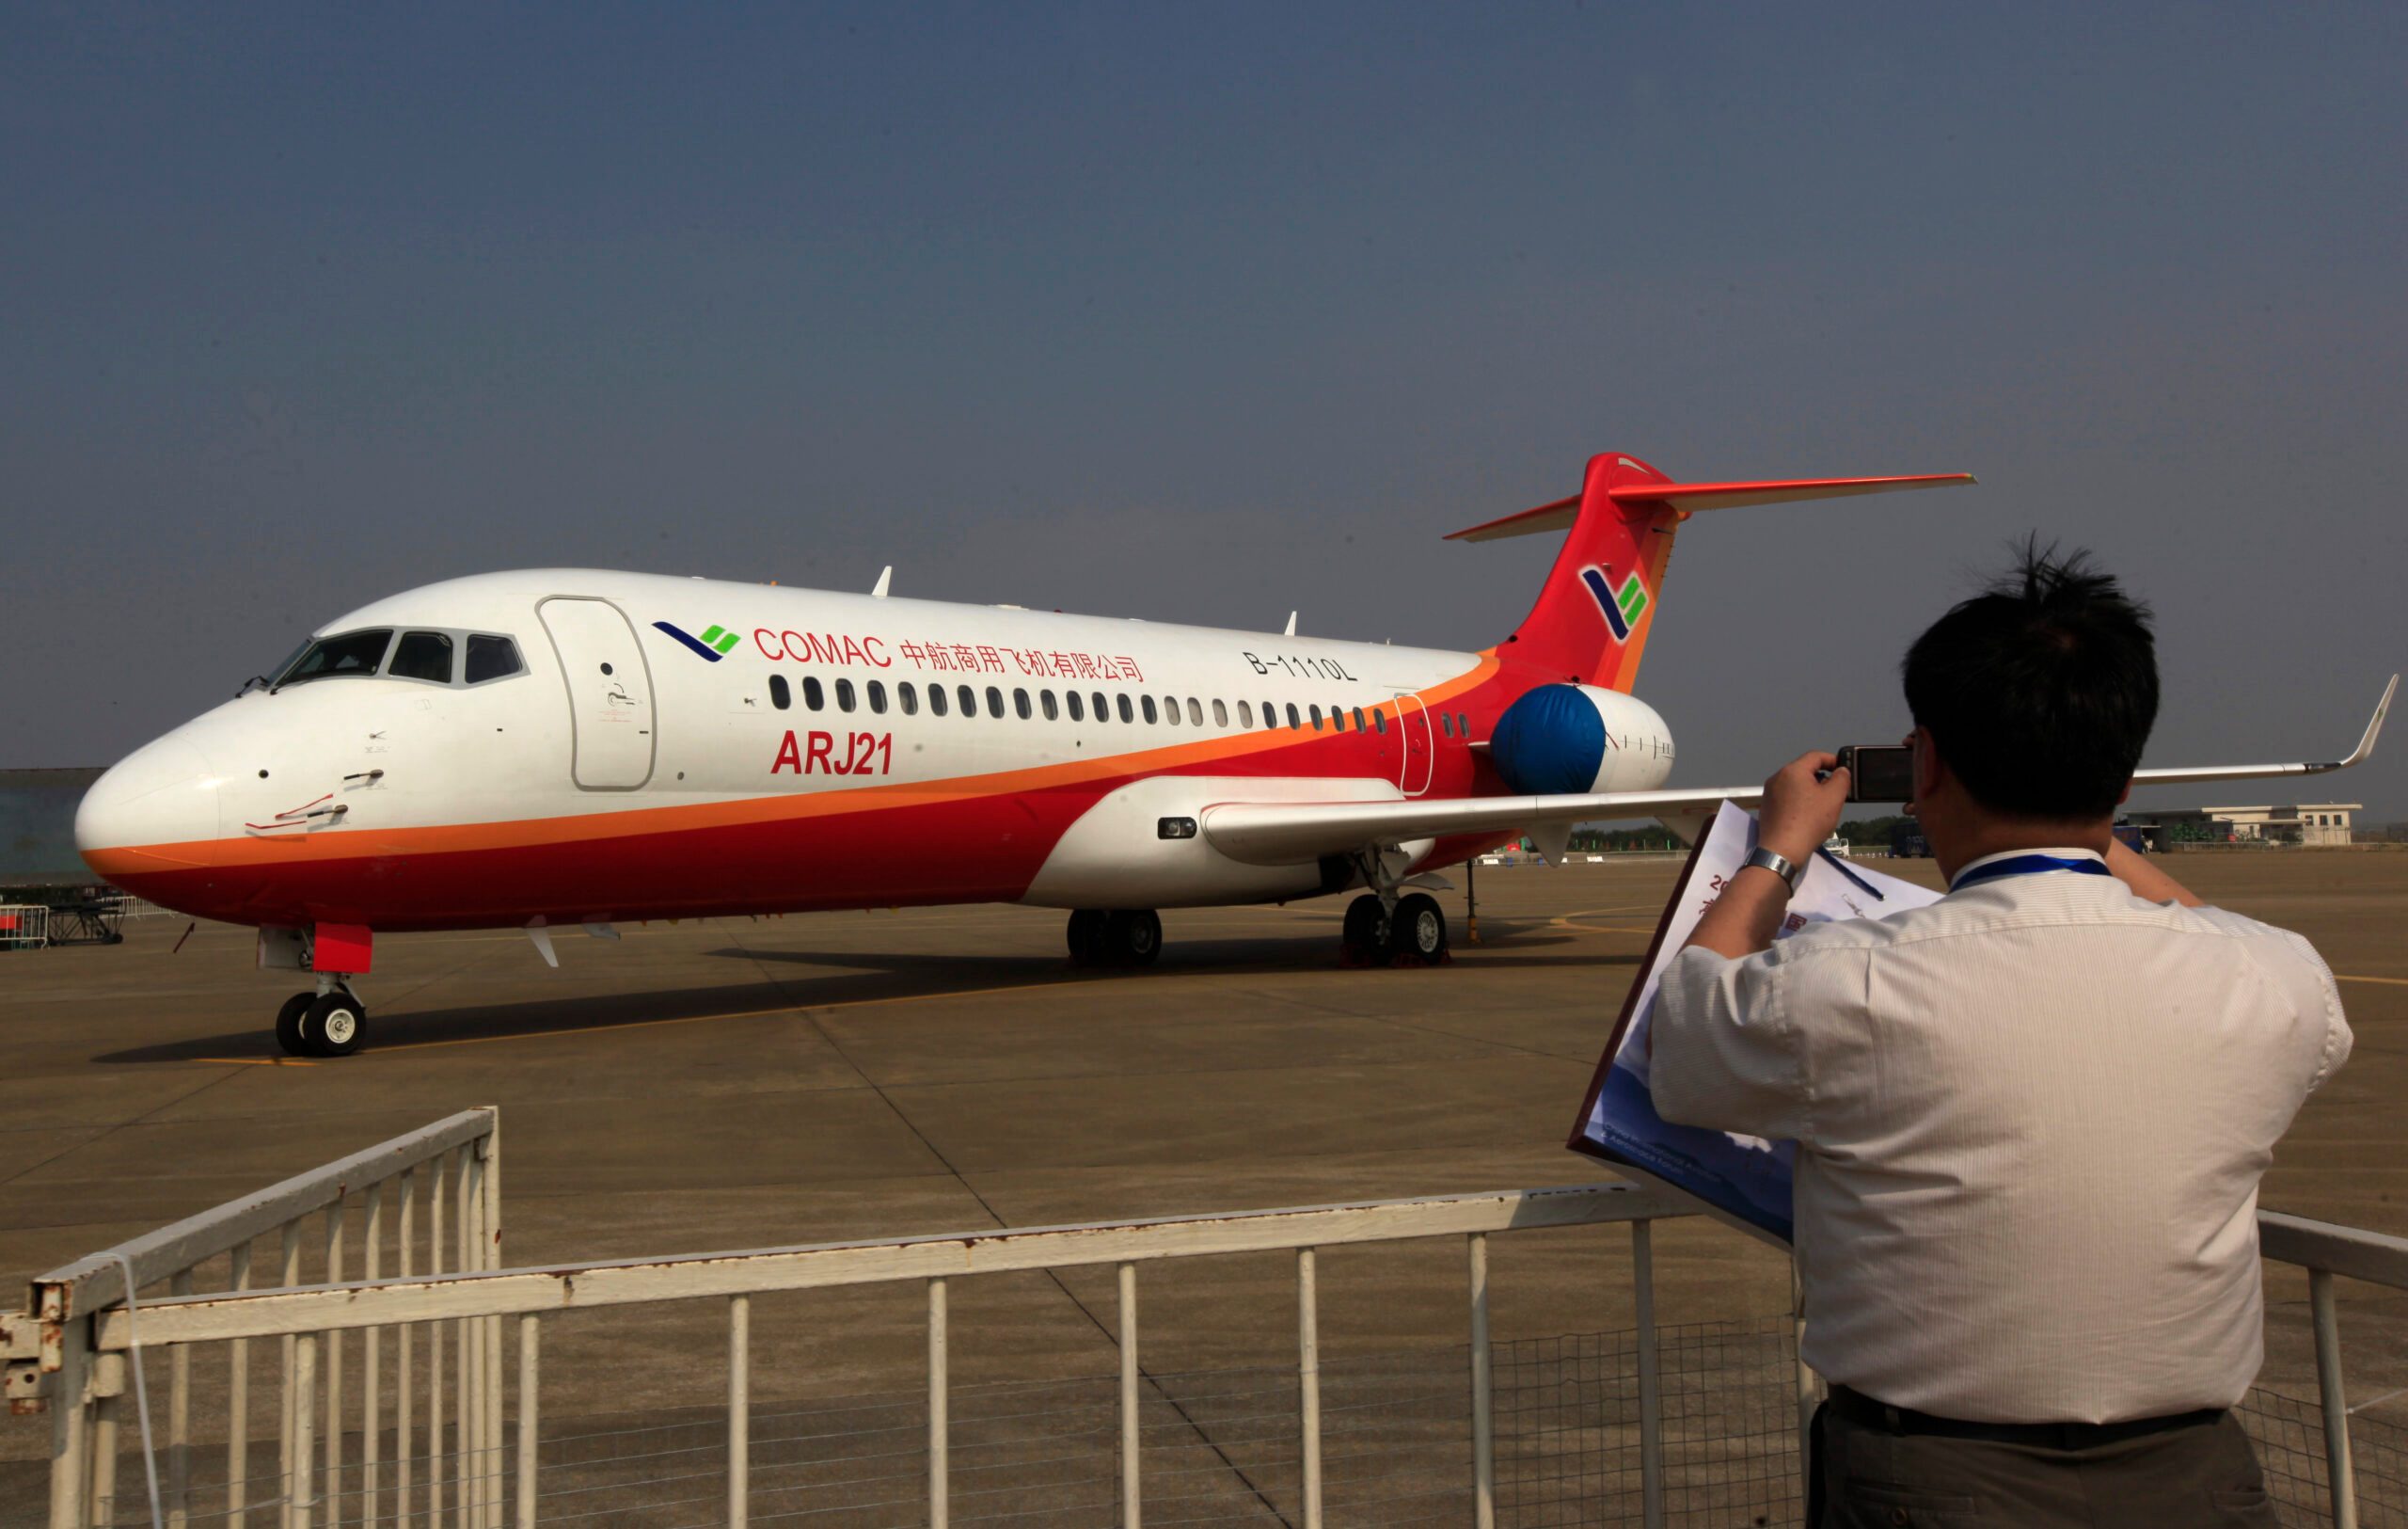 Delayed take-off for China’s own regional jet